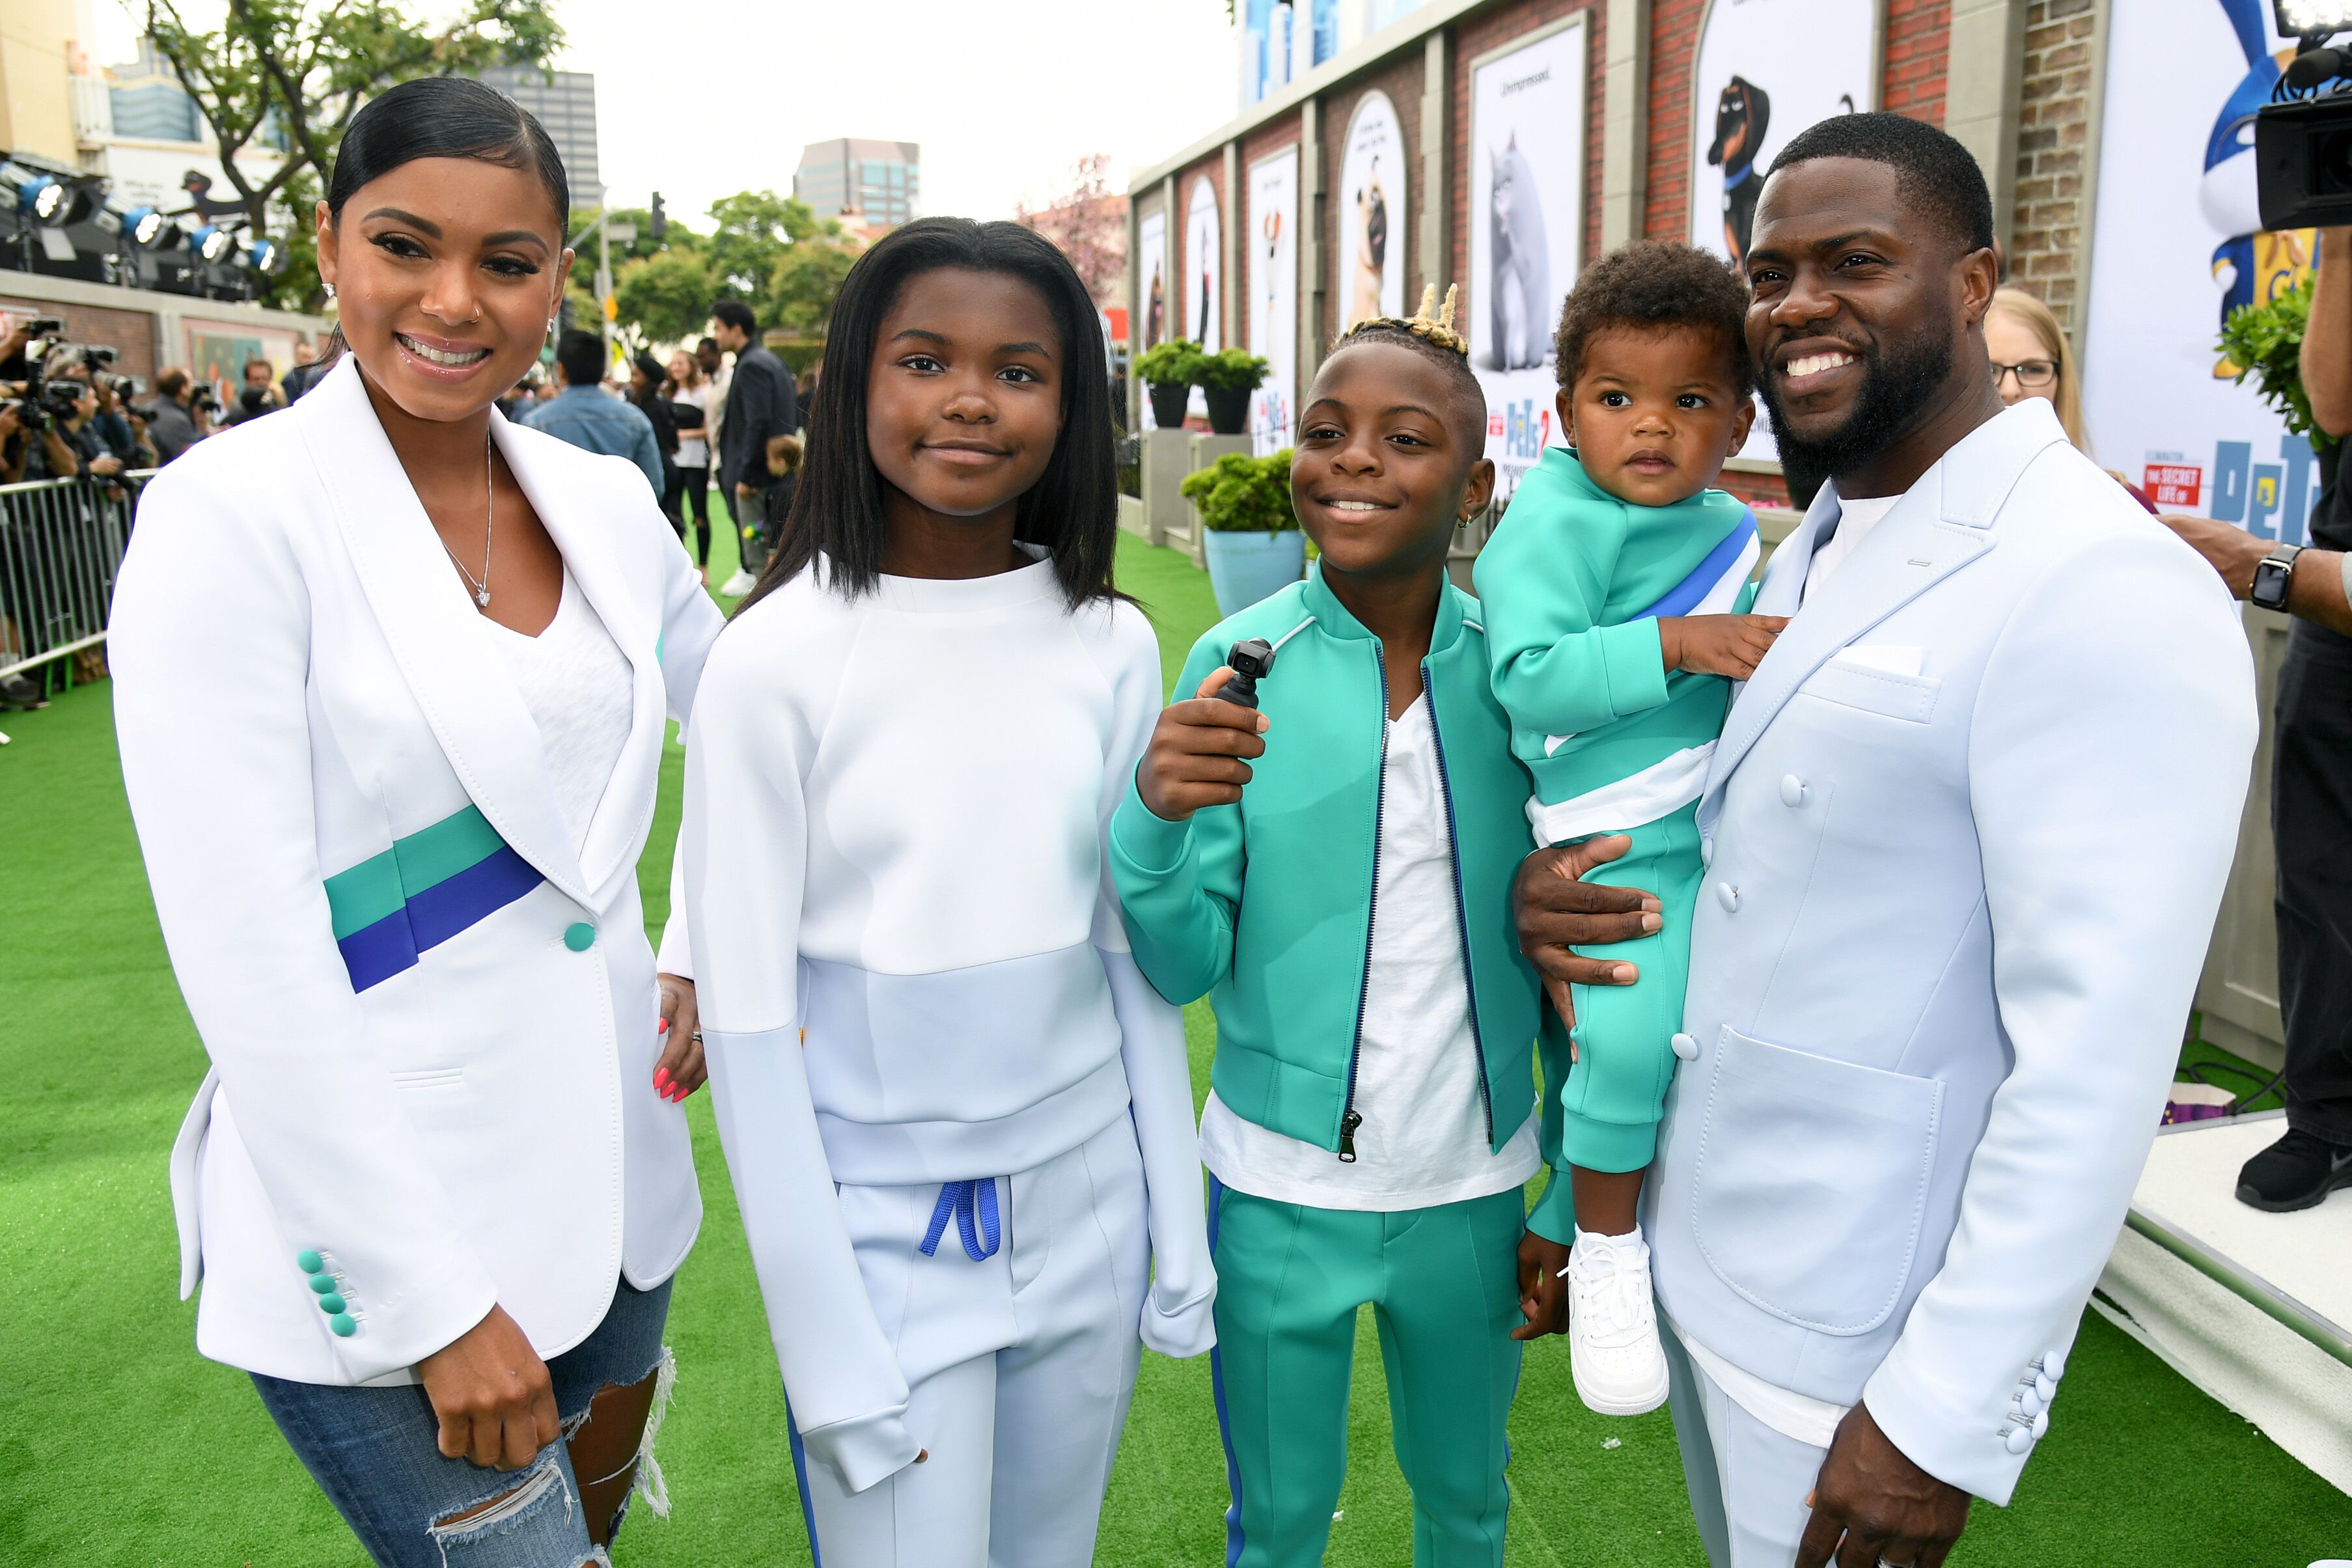 Kevin Hart, Eniko Parrish and their blended family/ Source: Getty Images